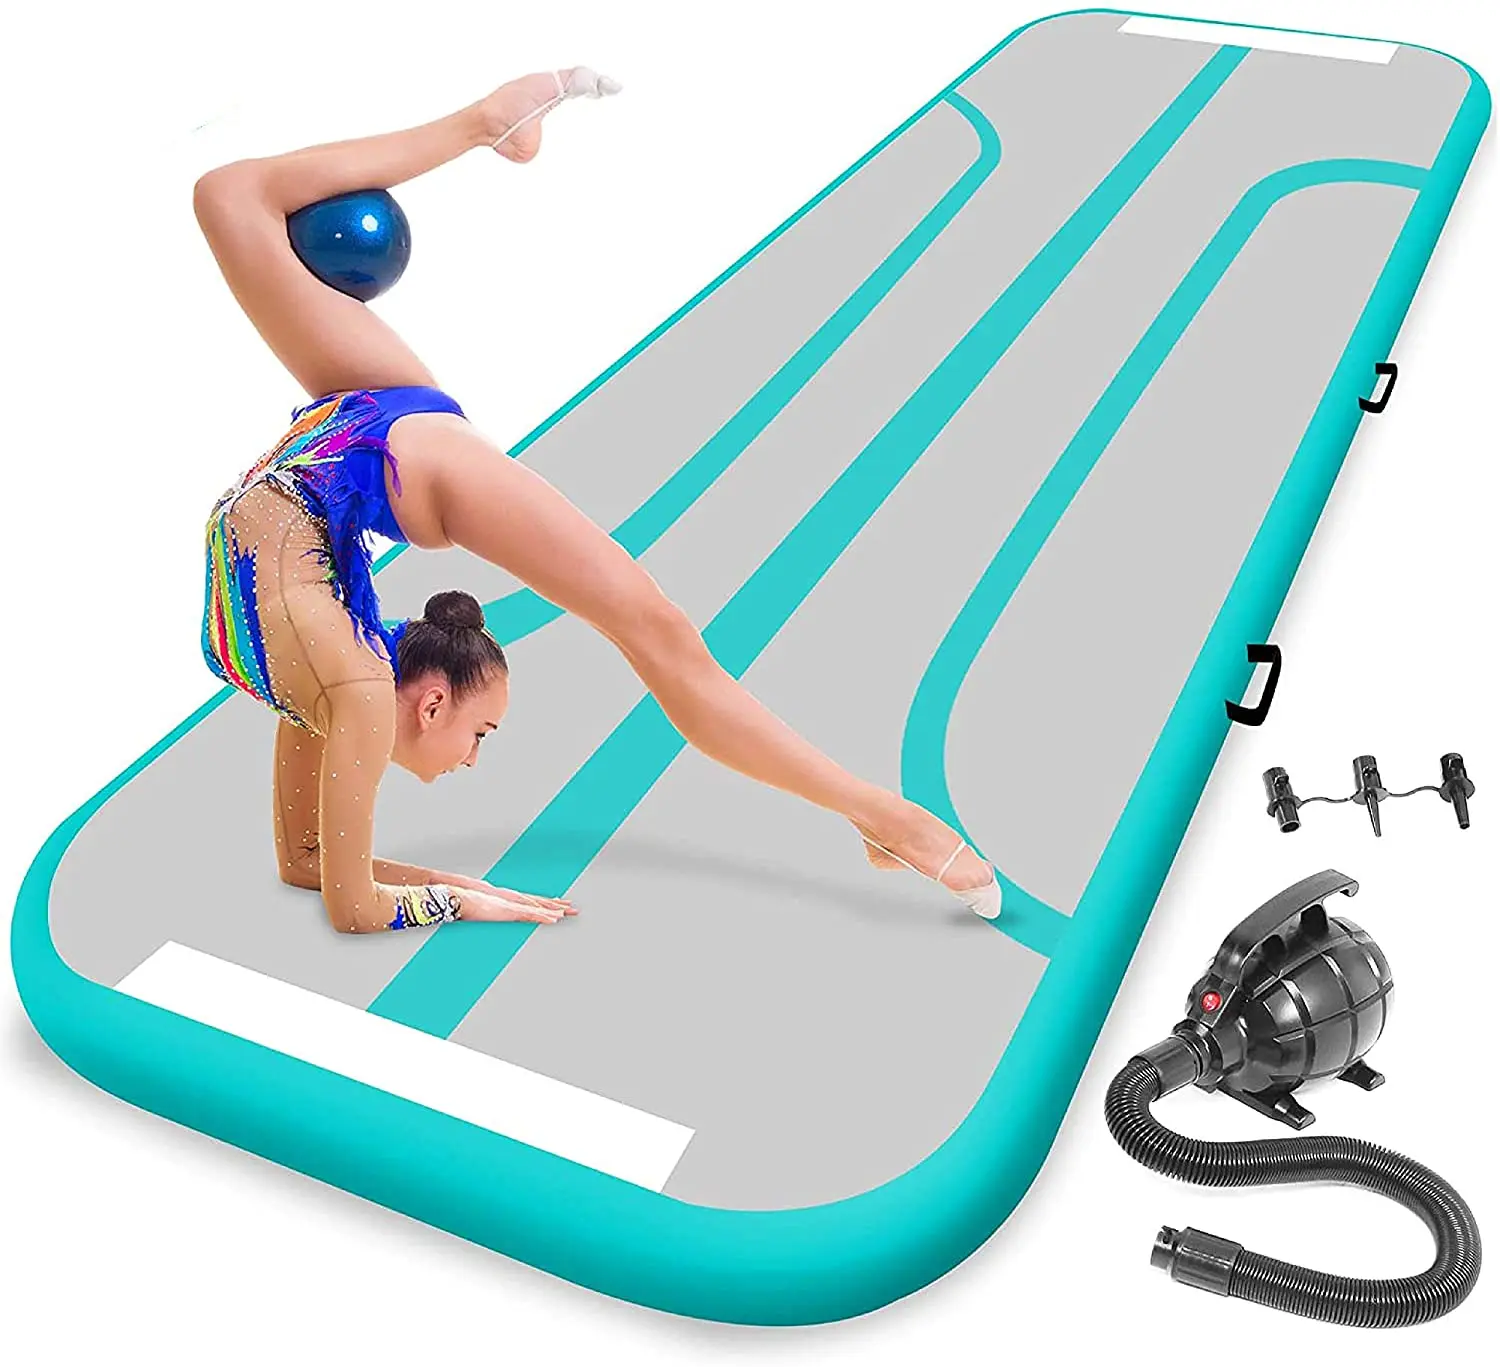 Air Tumble Track Set Inflatable Airtrack Gymnastics Mat with Electric Air Pump for Practice Gymnastics Fostoy Air Tumble Track Mat Home Floor Tumbling,Parkour